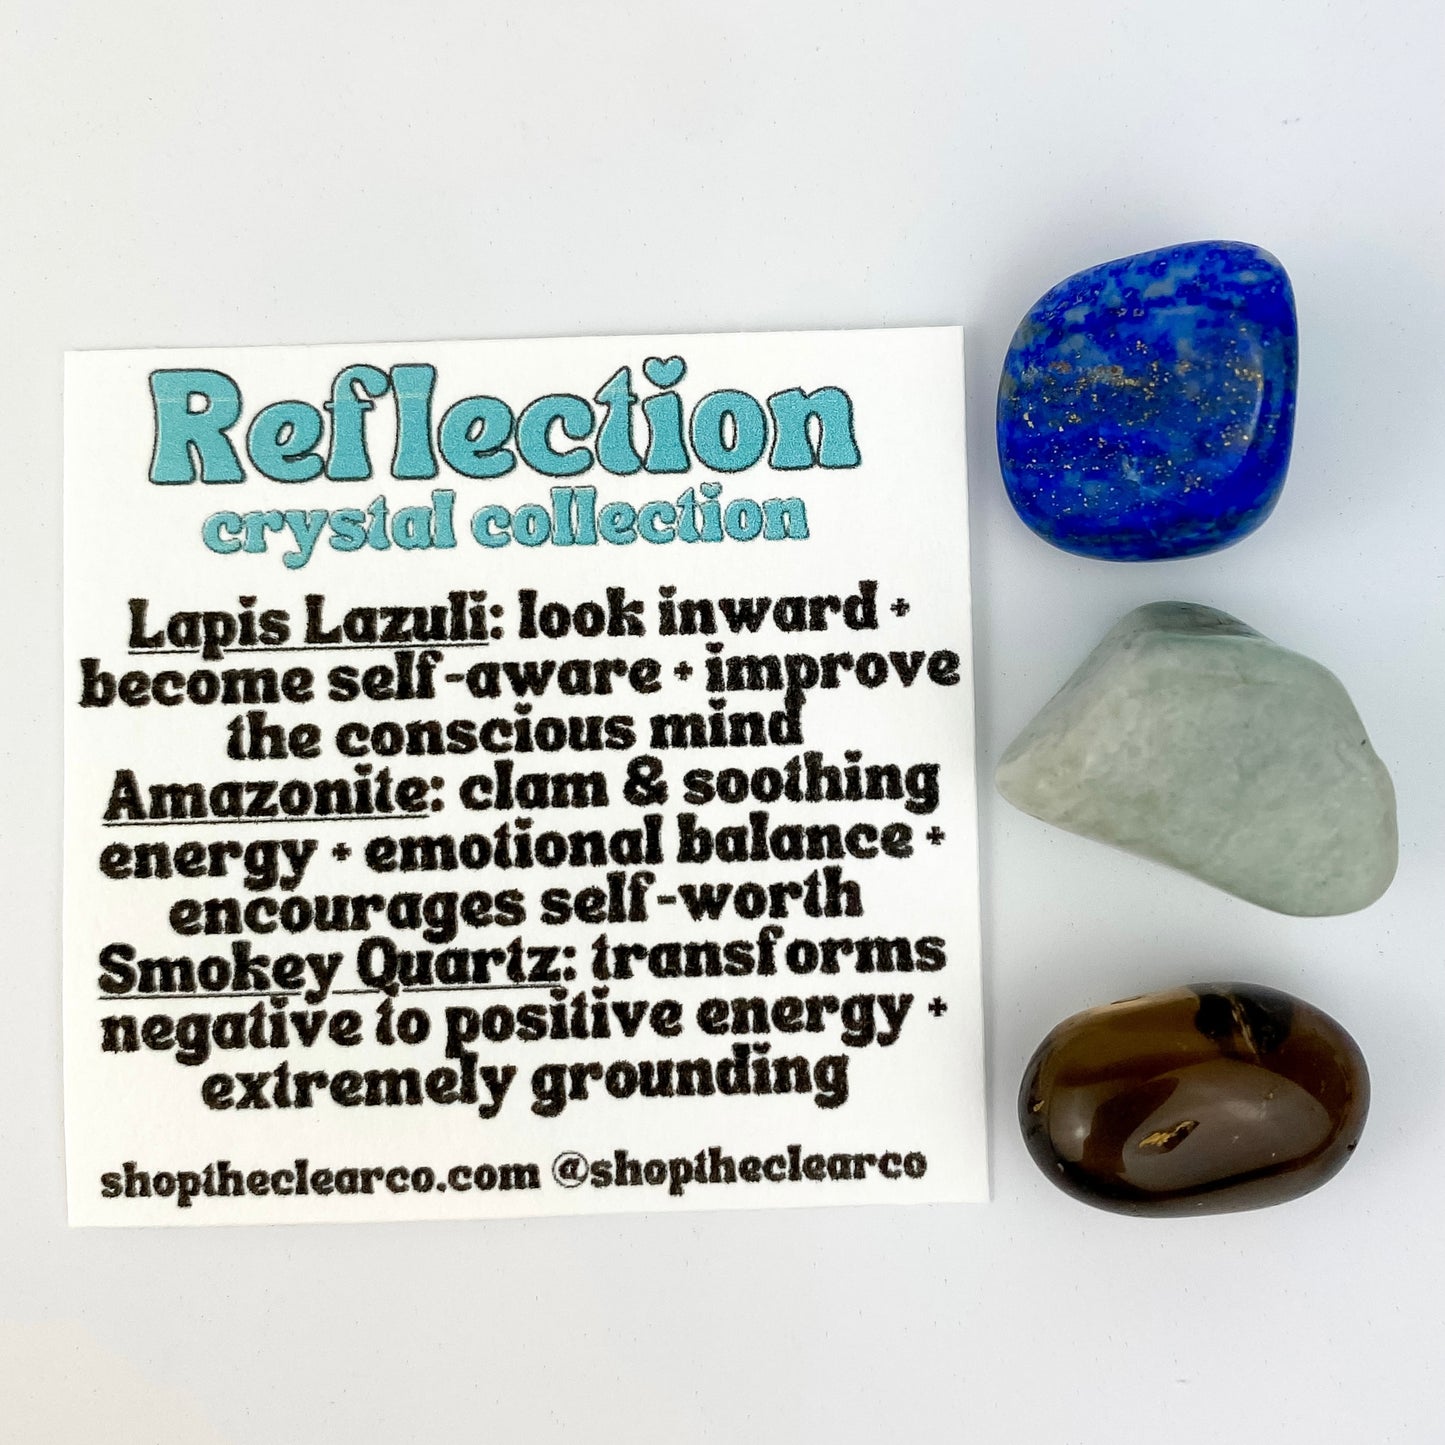 Reflection - Crystal Collection